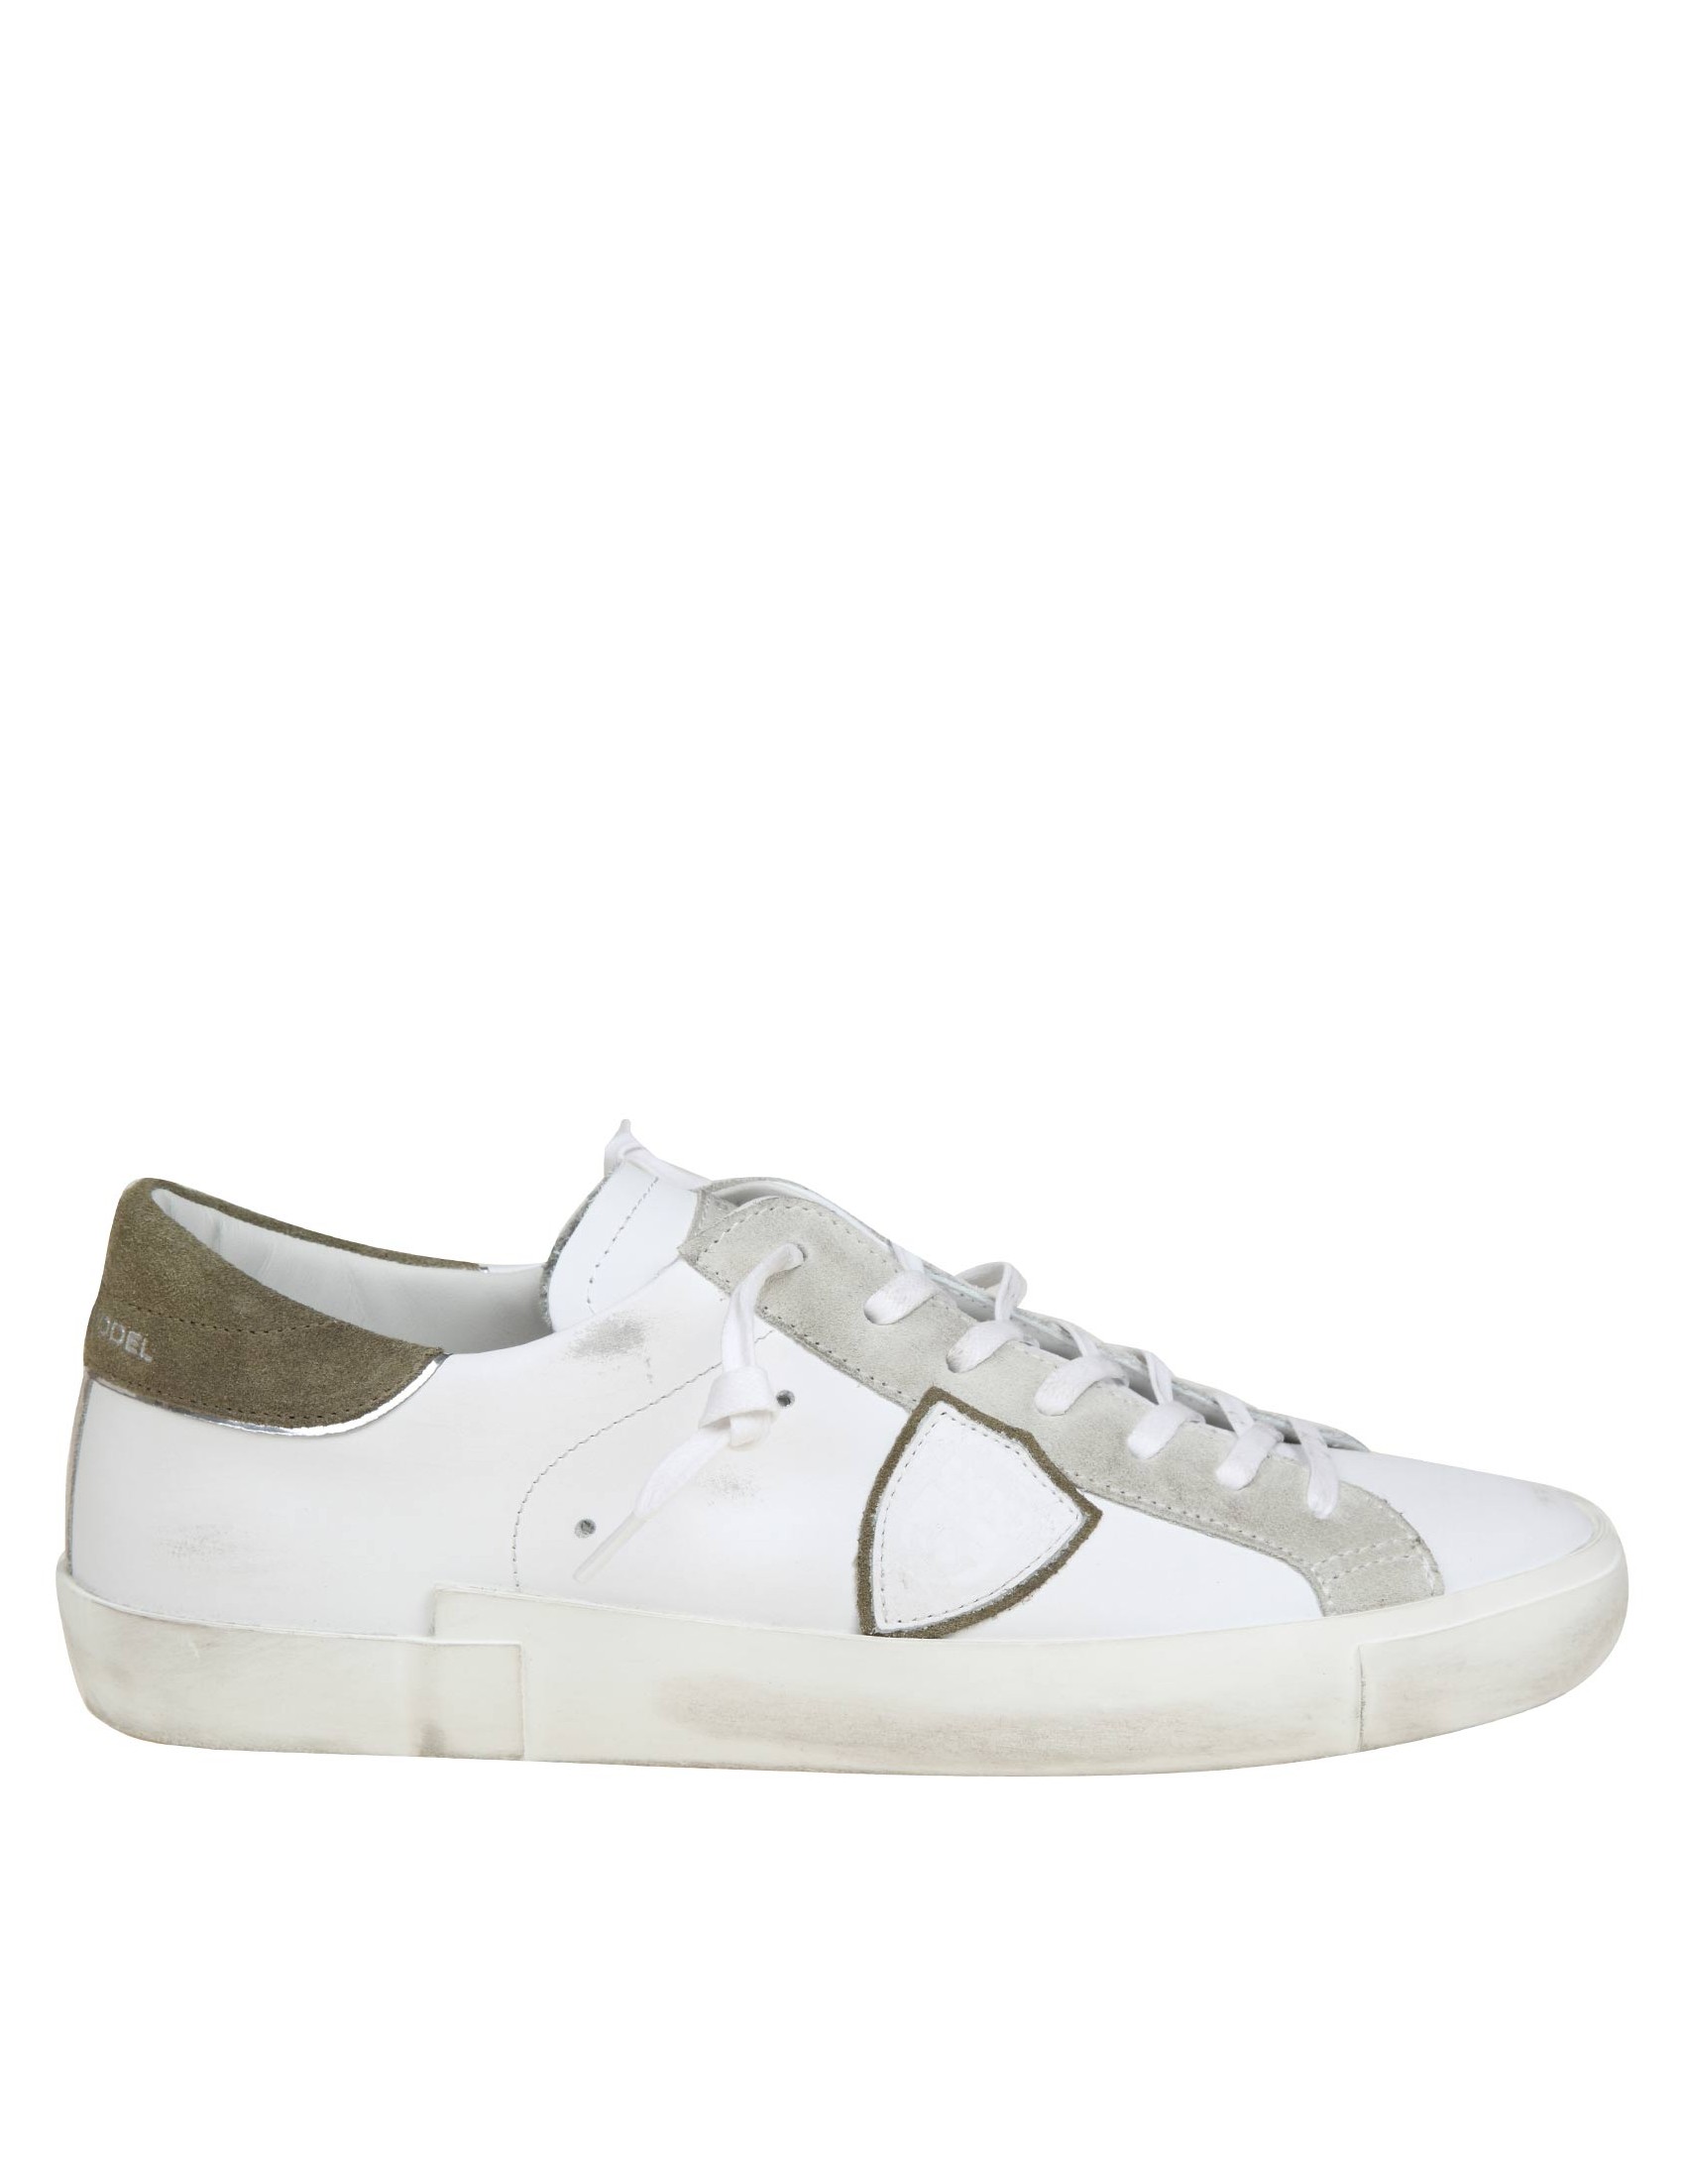 PHILIPPE MODEL PRSX SNEAKERS IN WHITE AND GREEN LEATHER